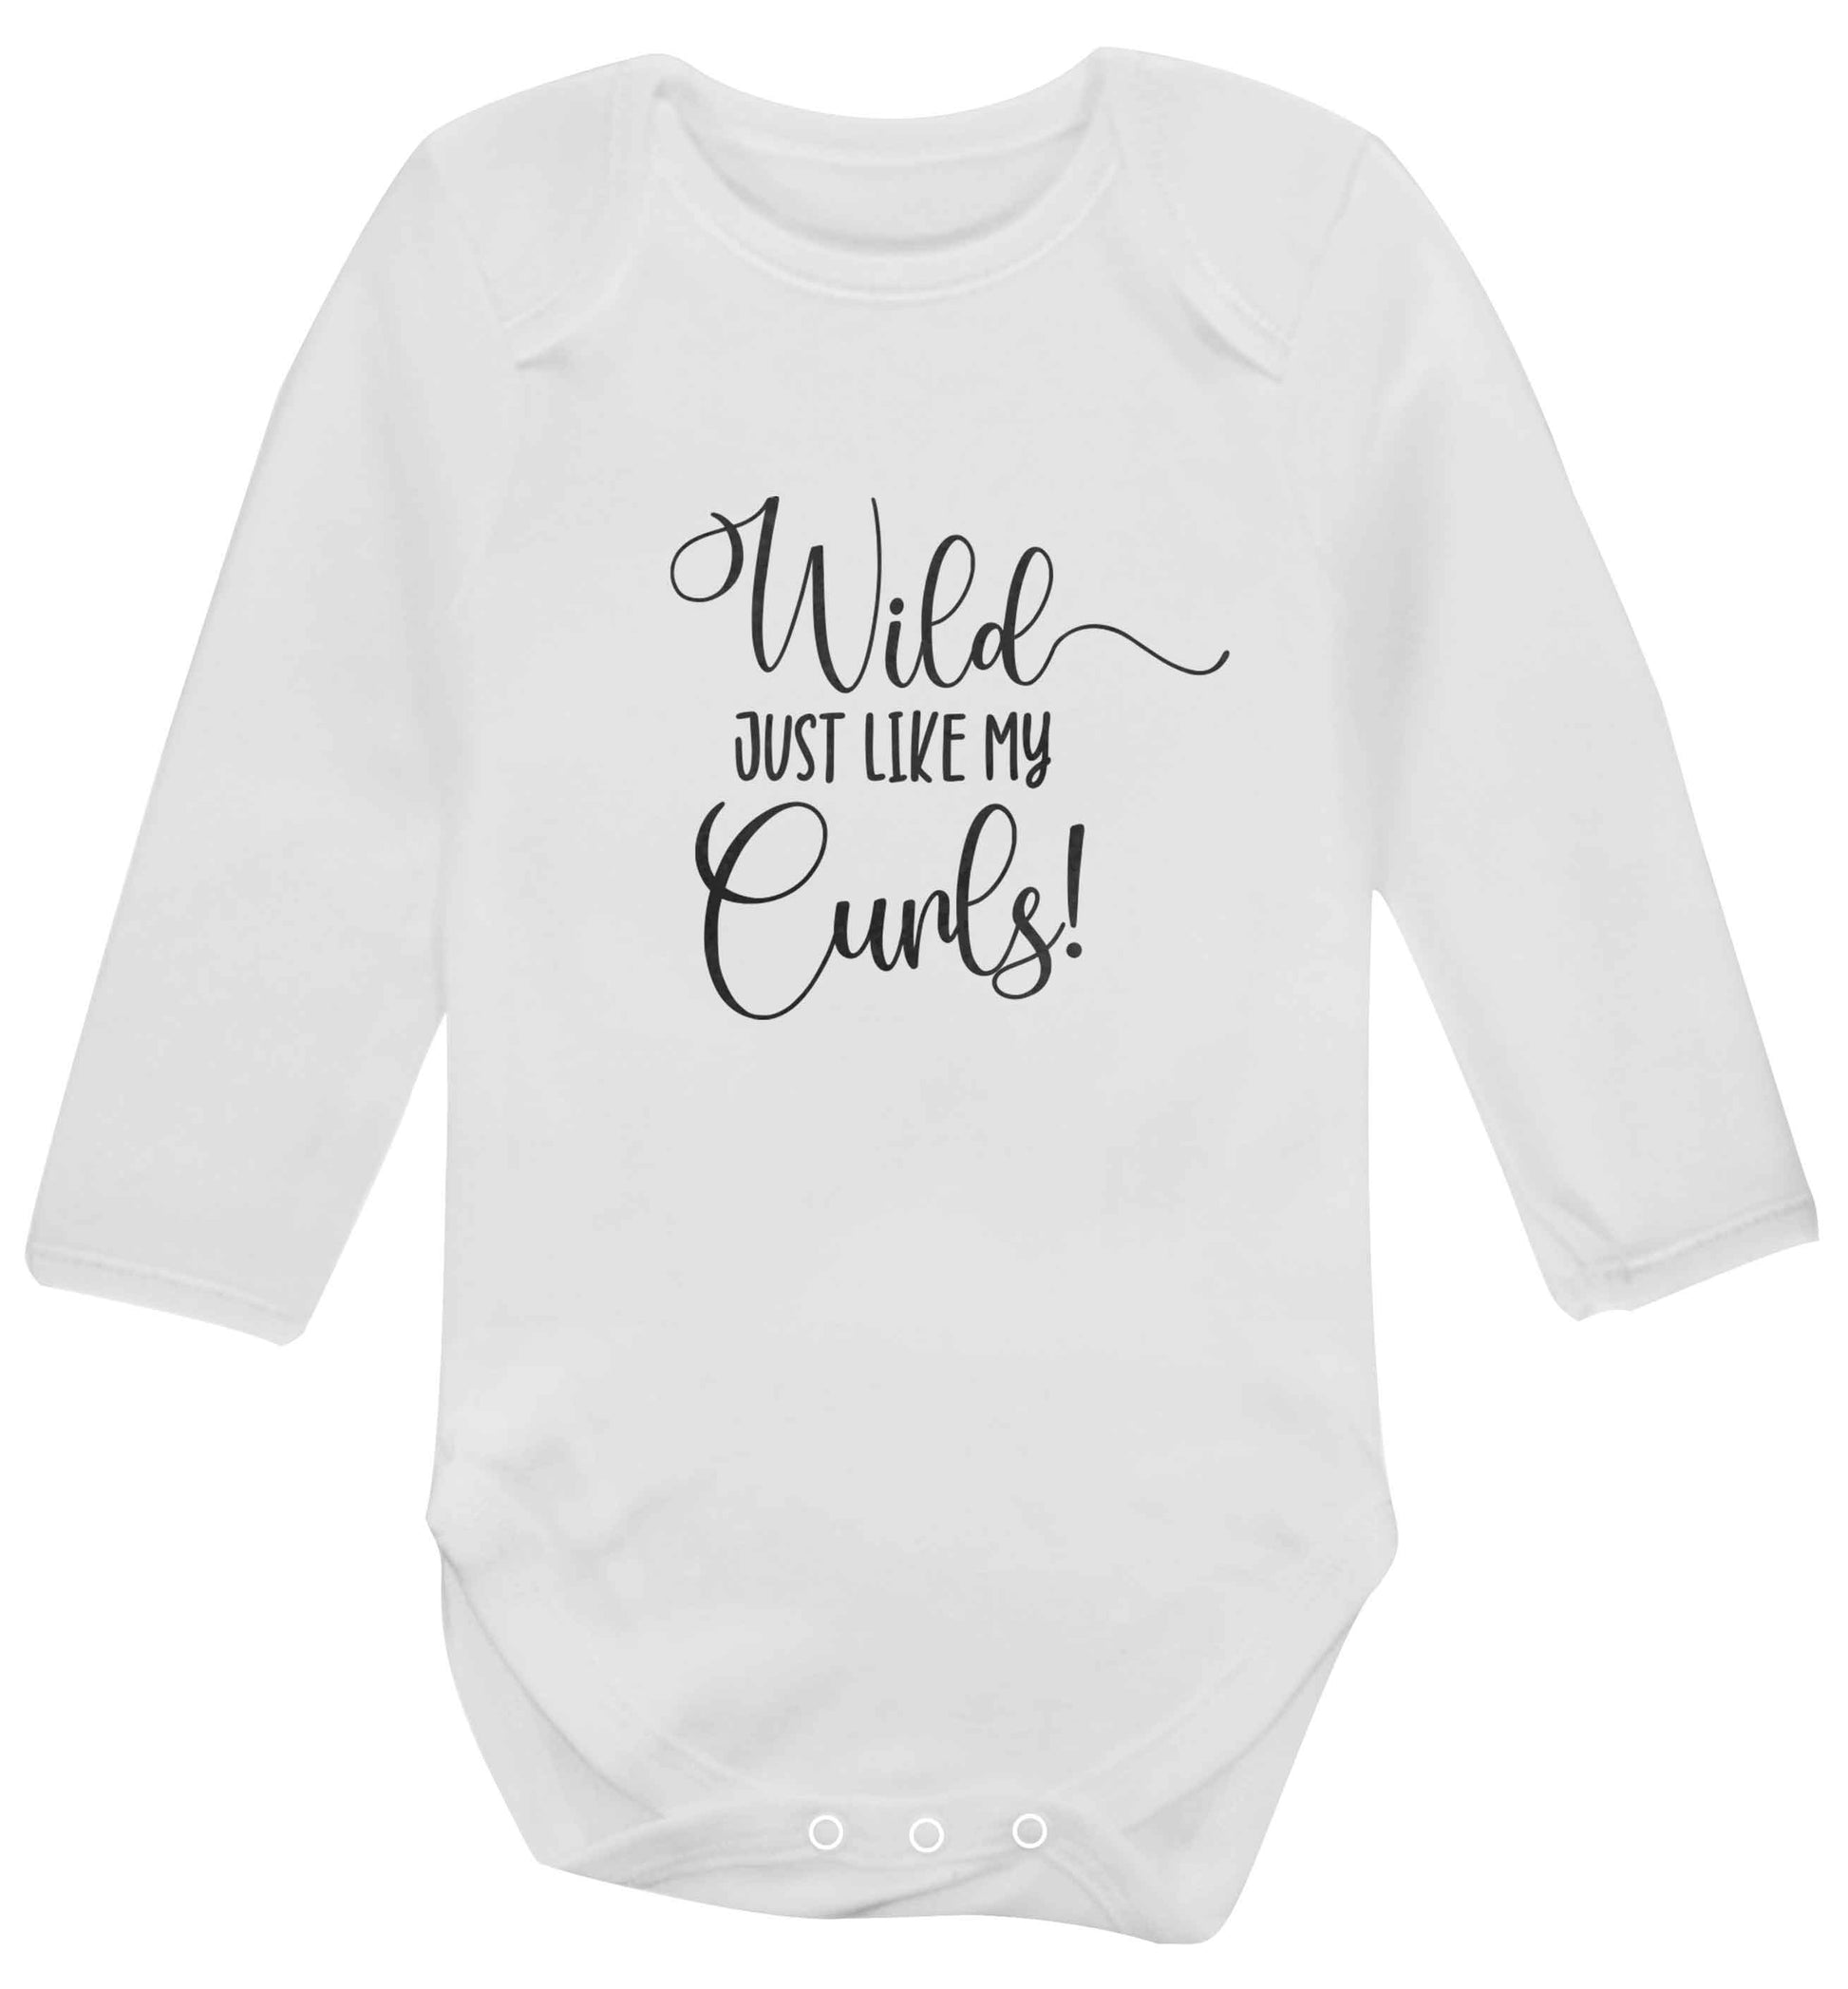 Wild just like my curls baby vest long sleeved white 6-12 months